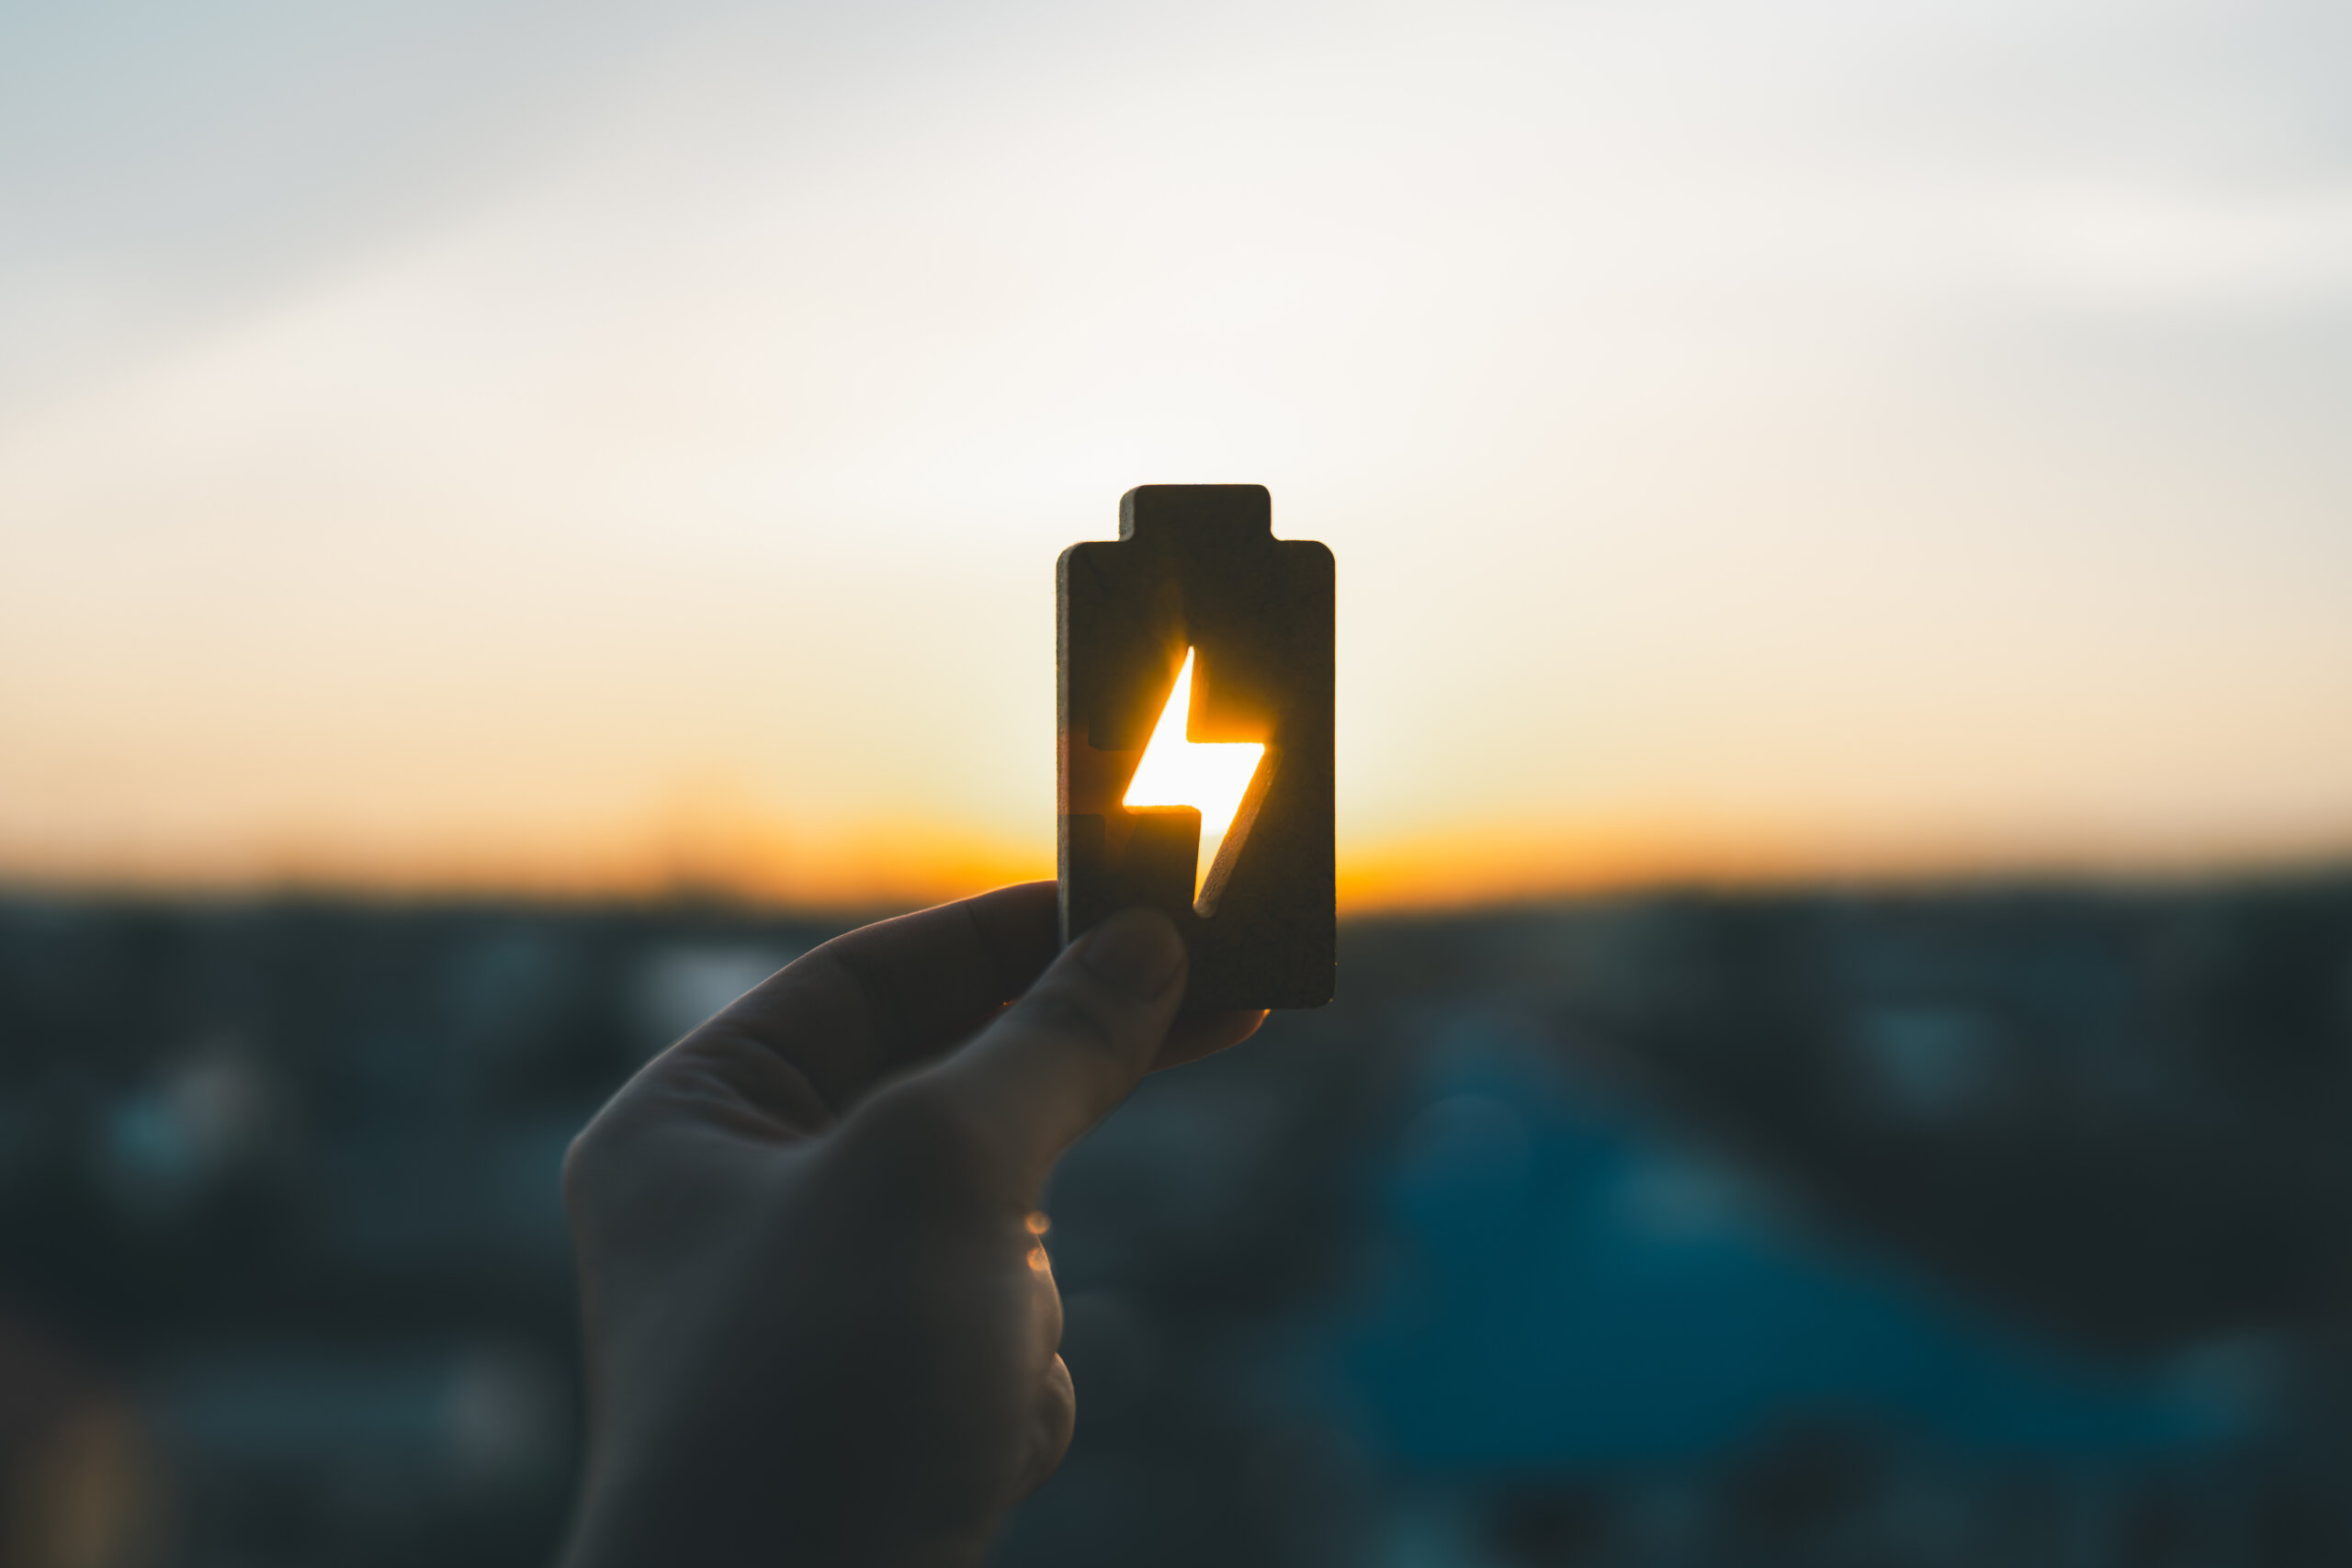 A BATTERY BEING HELD UP TO THE SUNSET